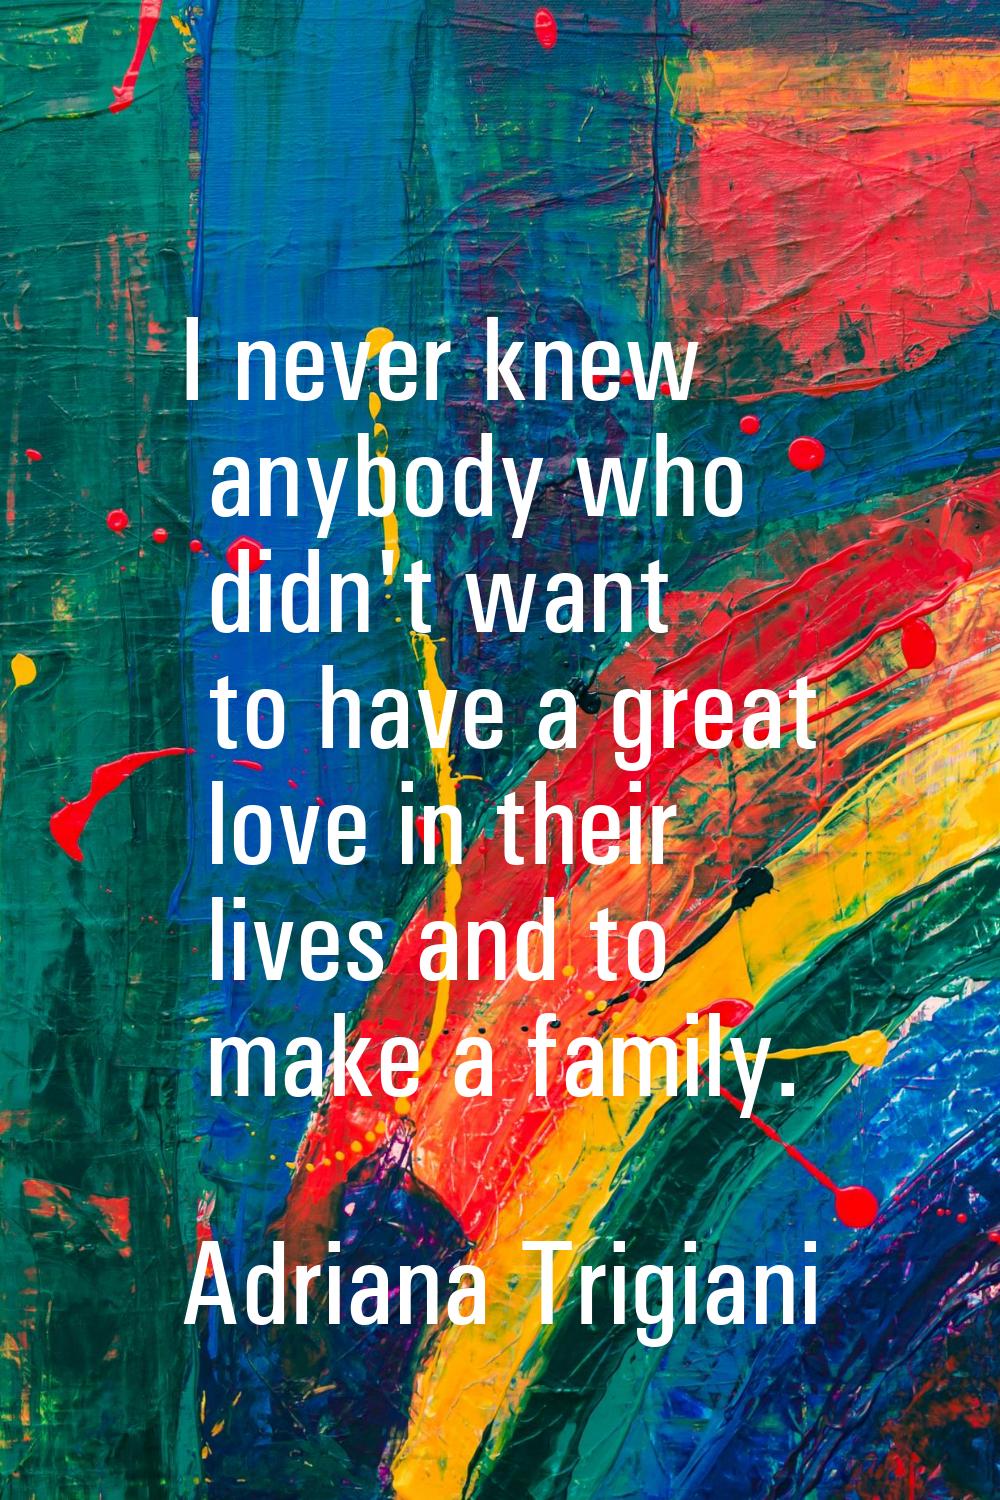 I never knew anybody who didn't want to have a great love in their lives and to make a family.